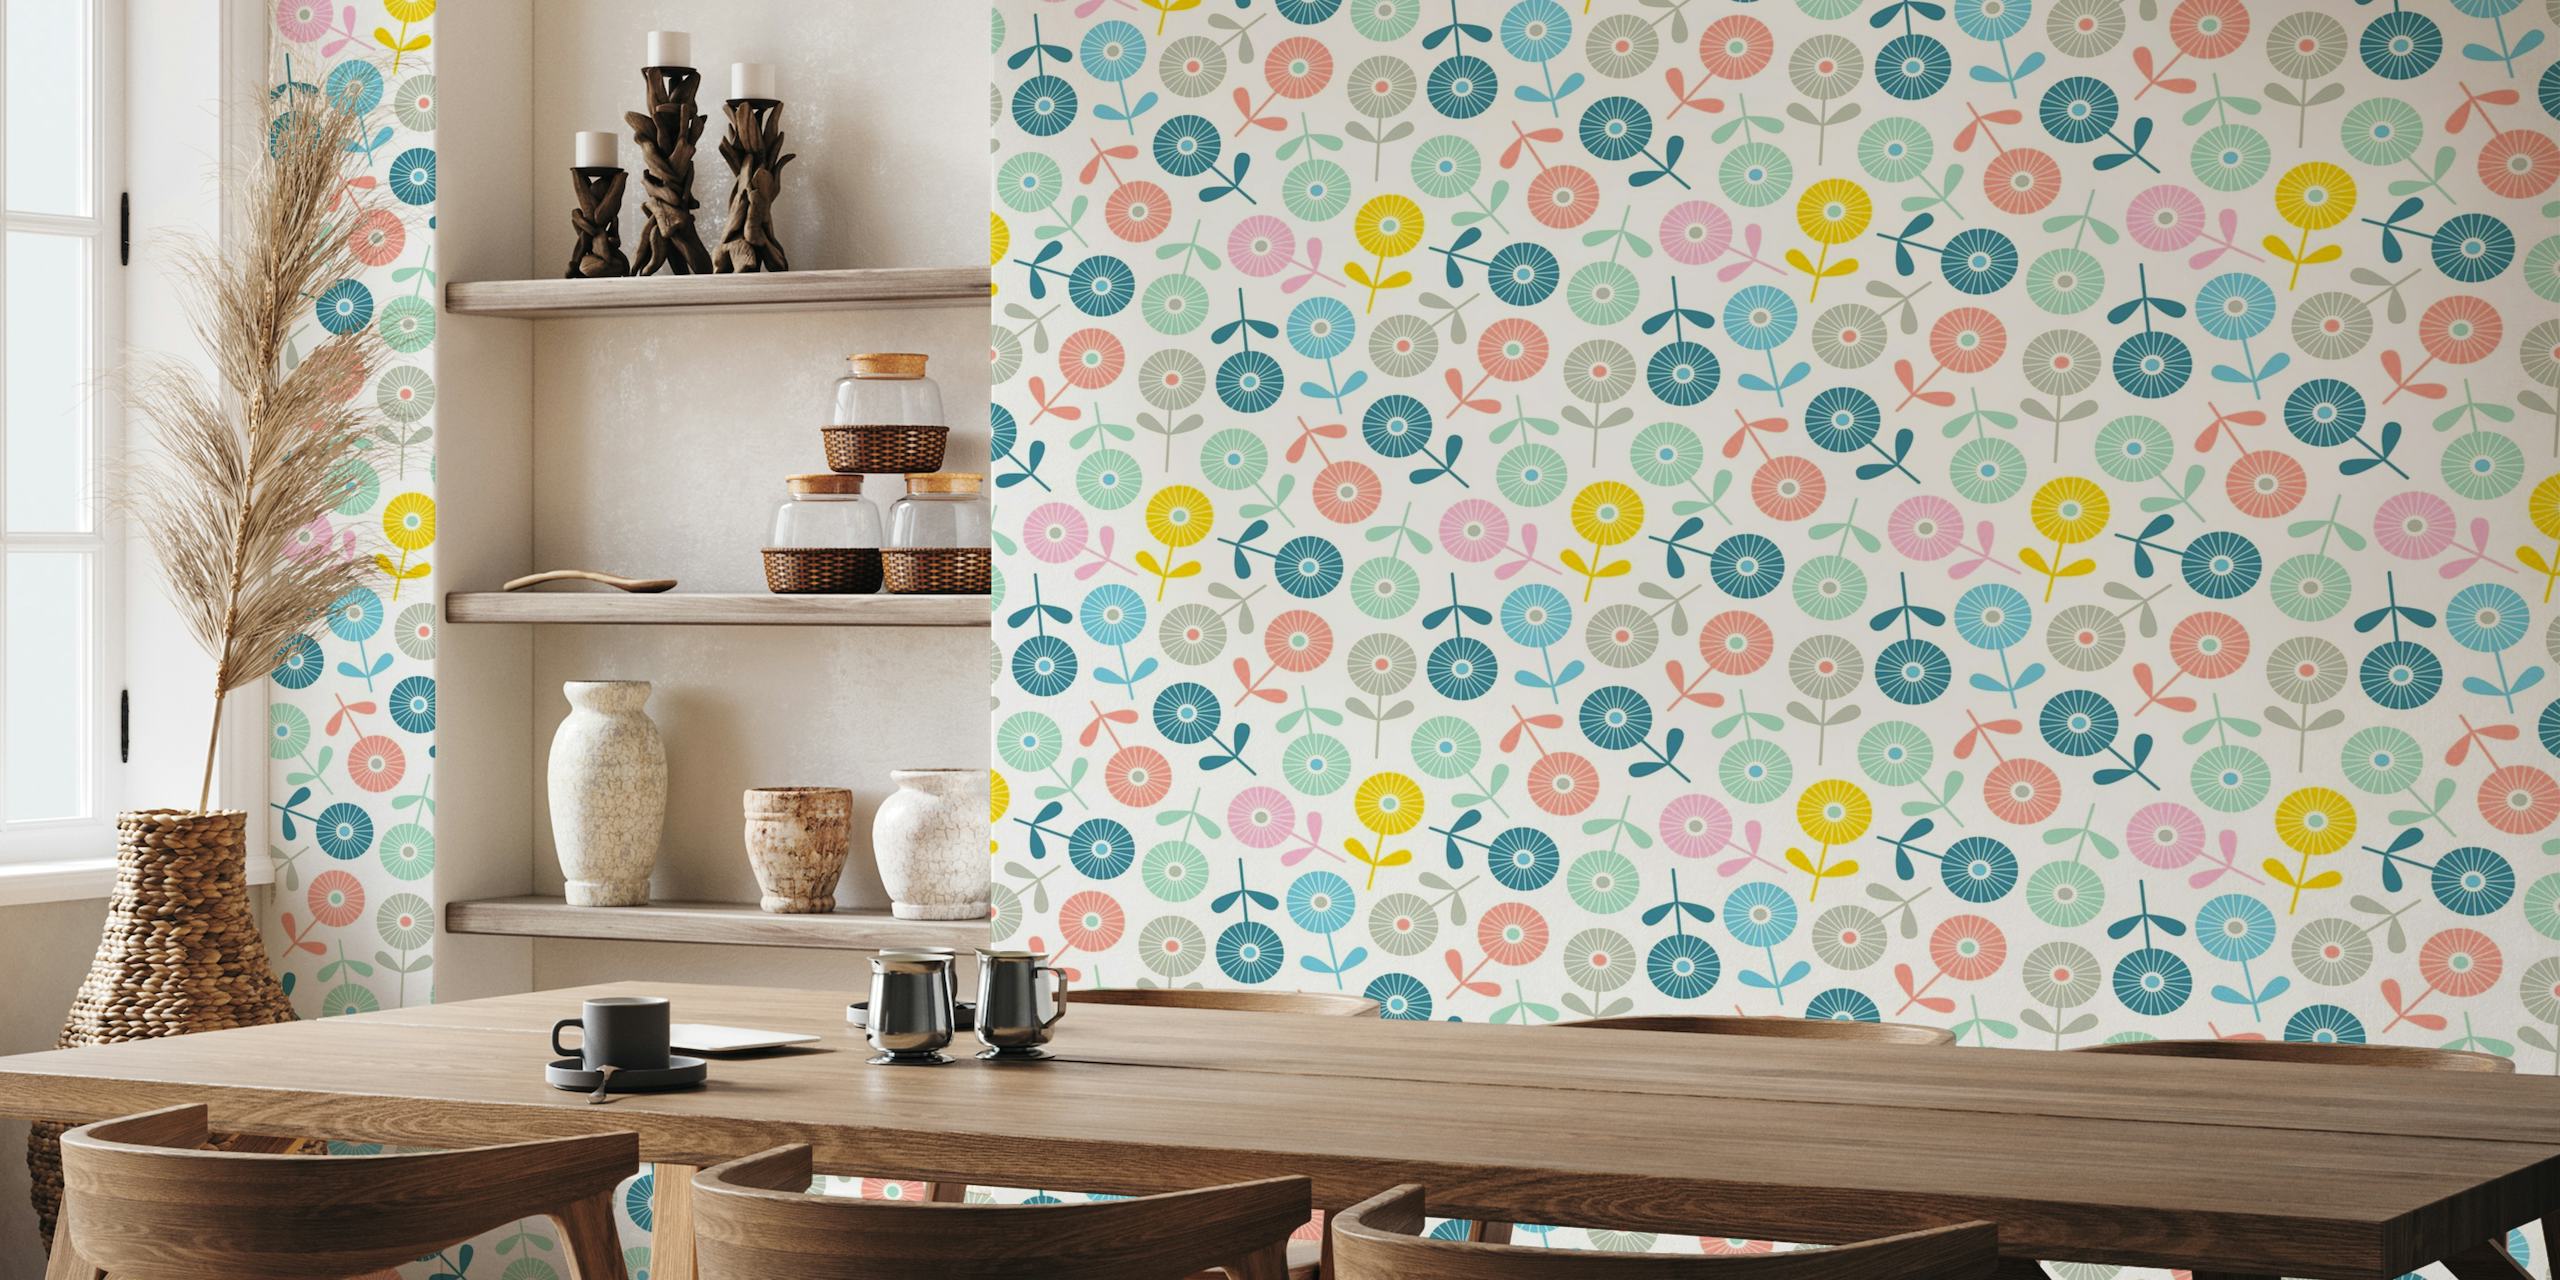 Pastel-colored floral patterns on a cream background wall mural